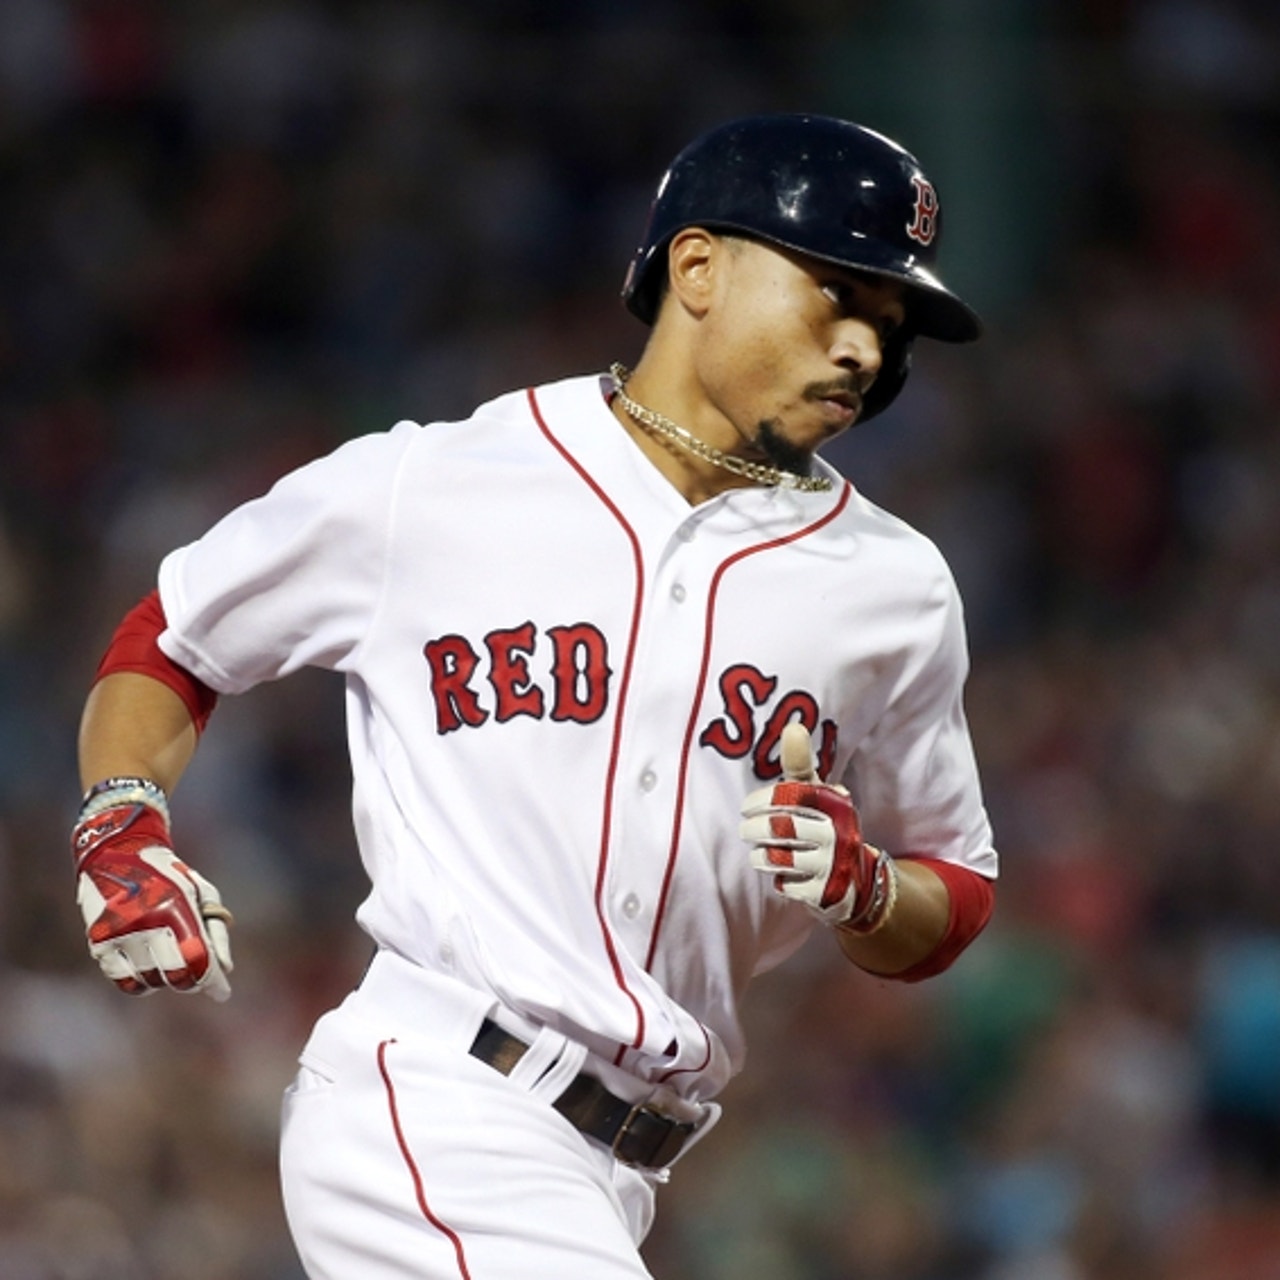 Mookie Betts' All-Star Game attire makes powerful racial statement